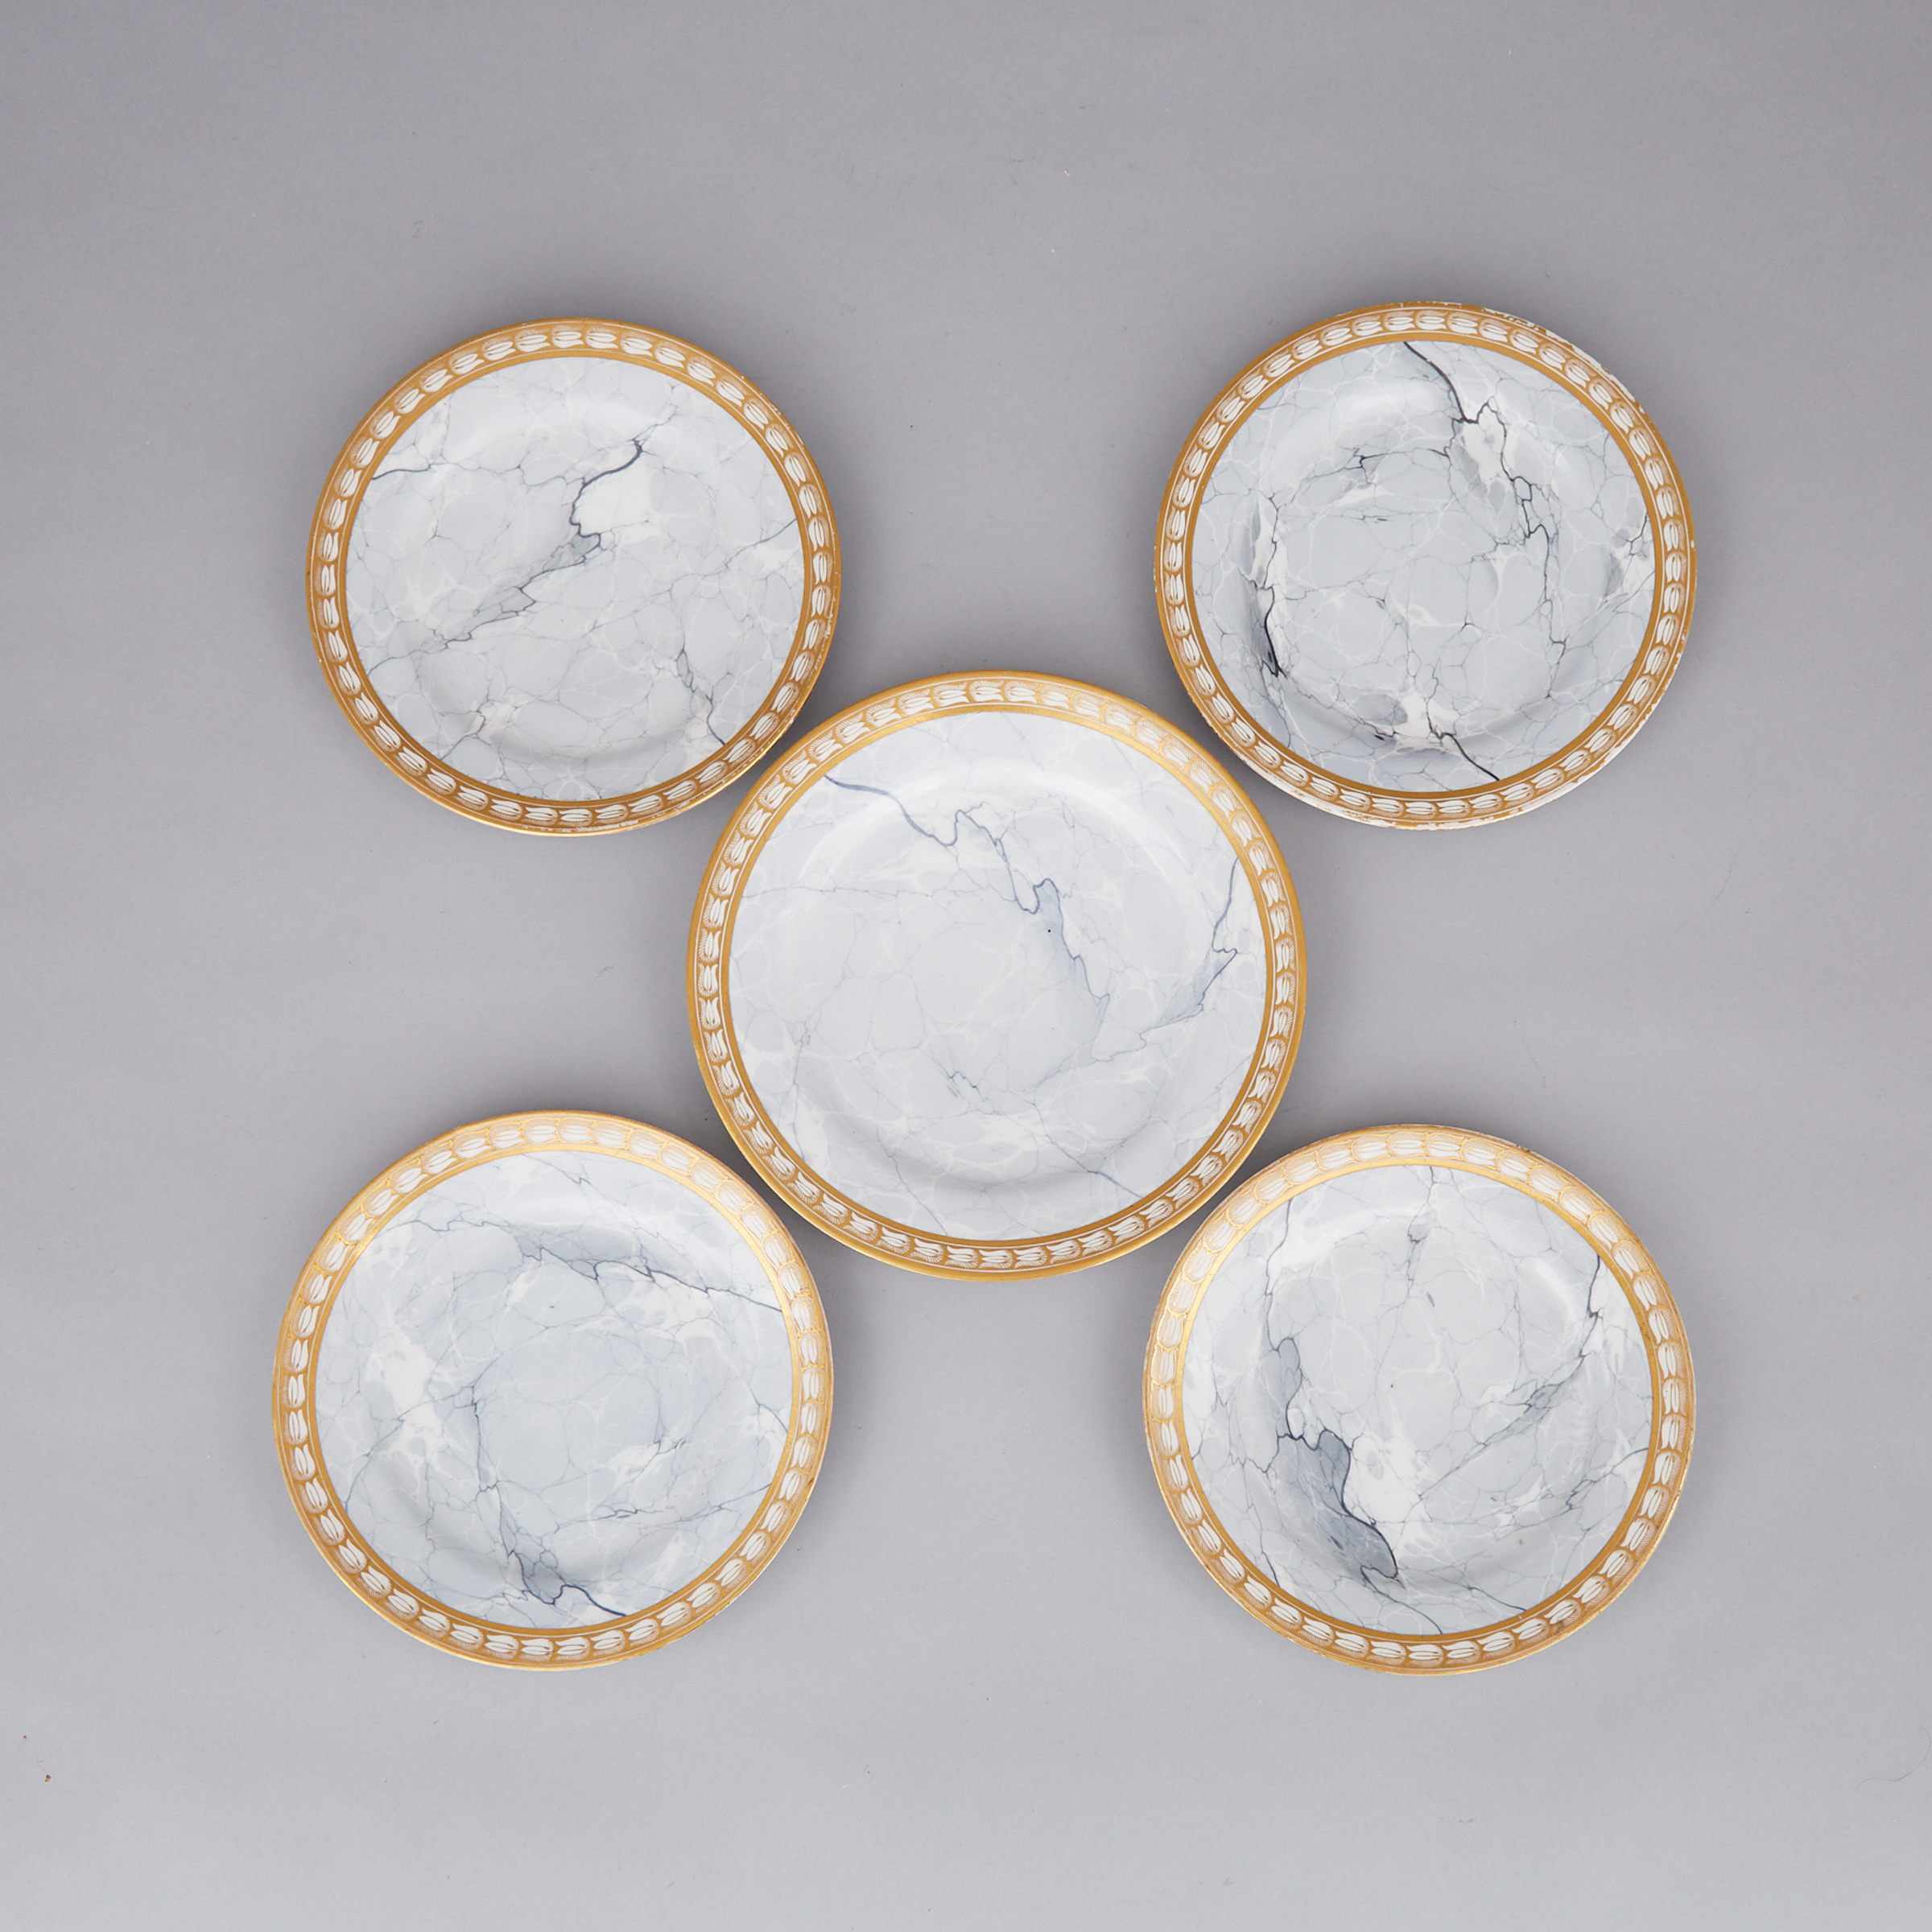 Five Barr, Flight & Barr Worcester Grey Marbled Ground and Gilt Plates, c.1810